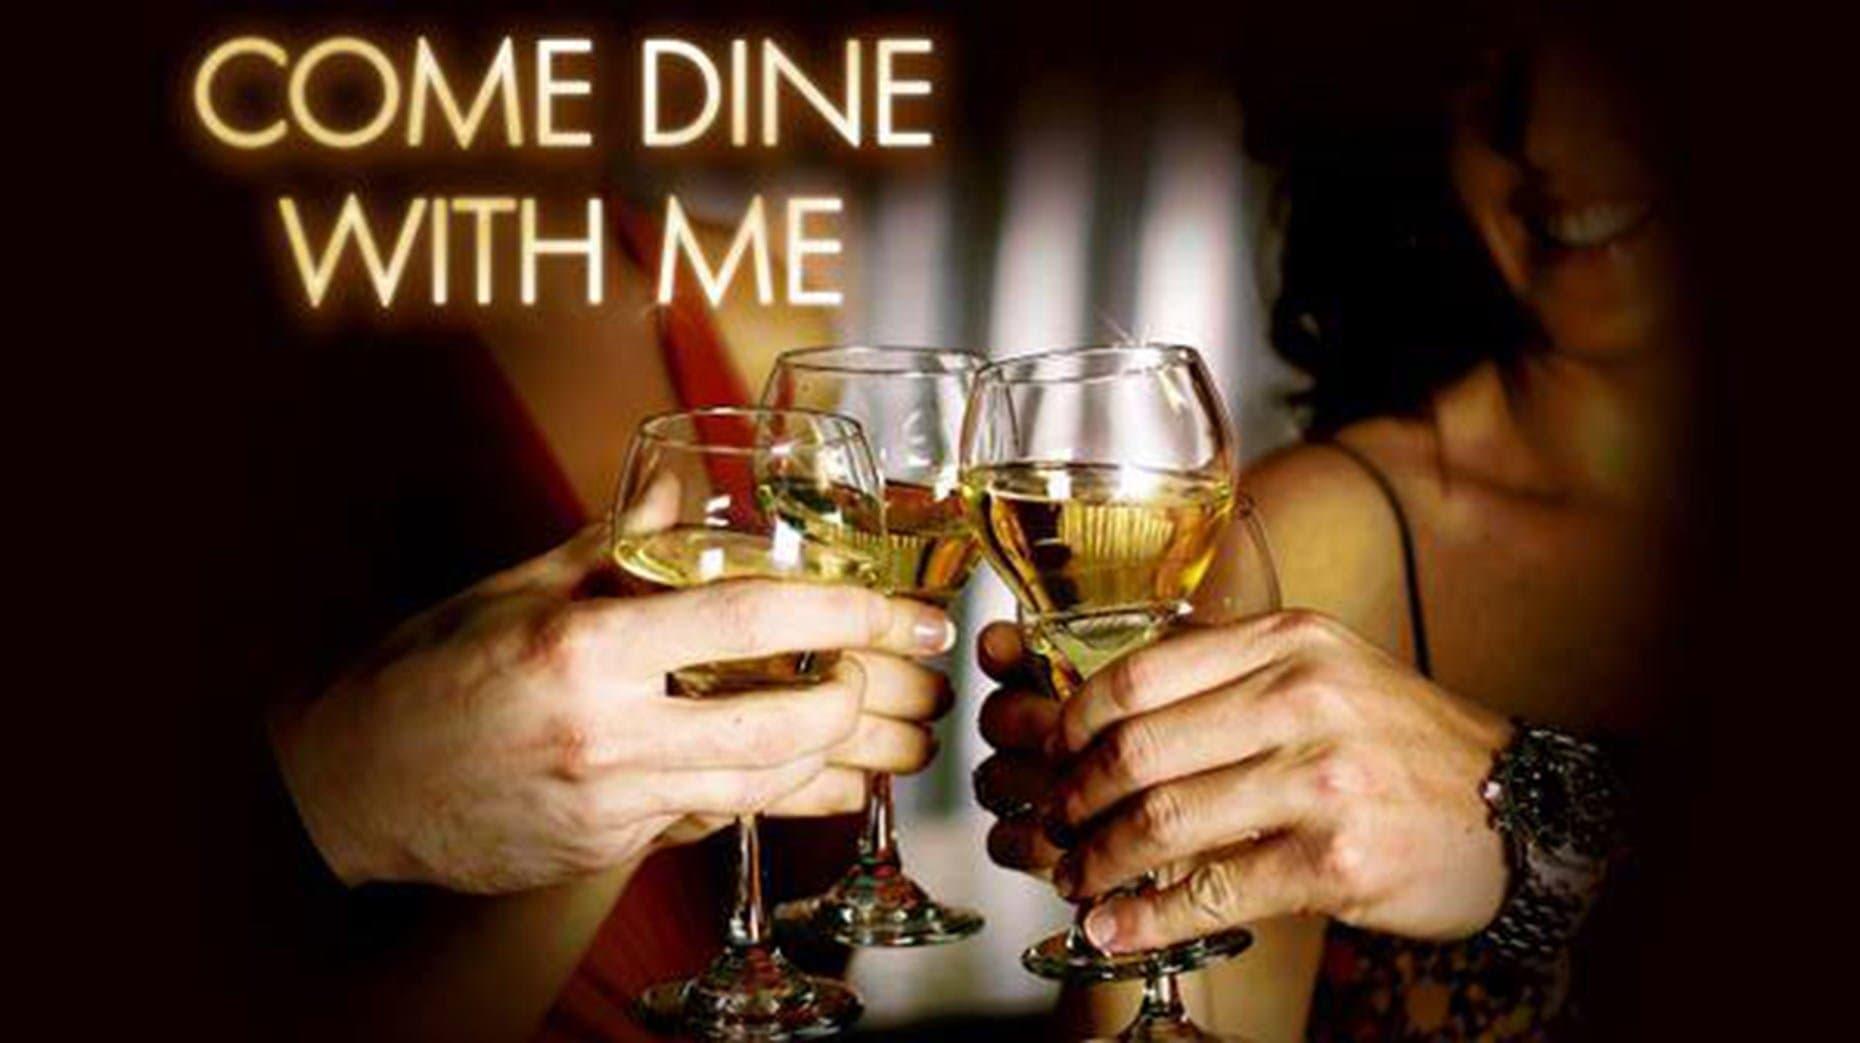 Come Dine with Me backdrop